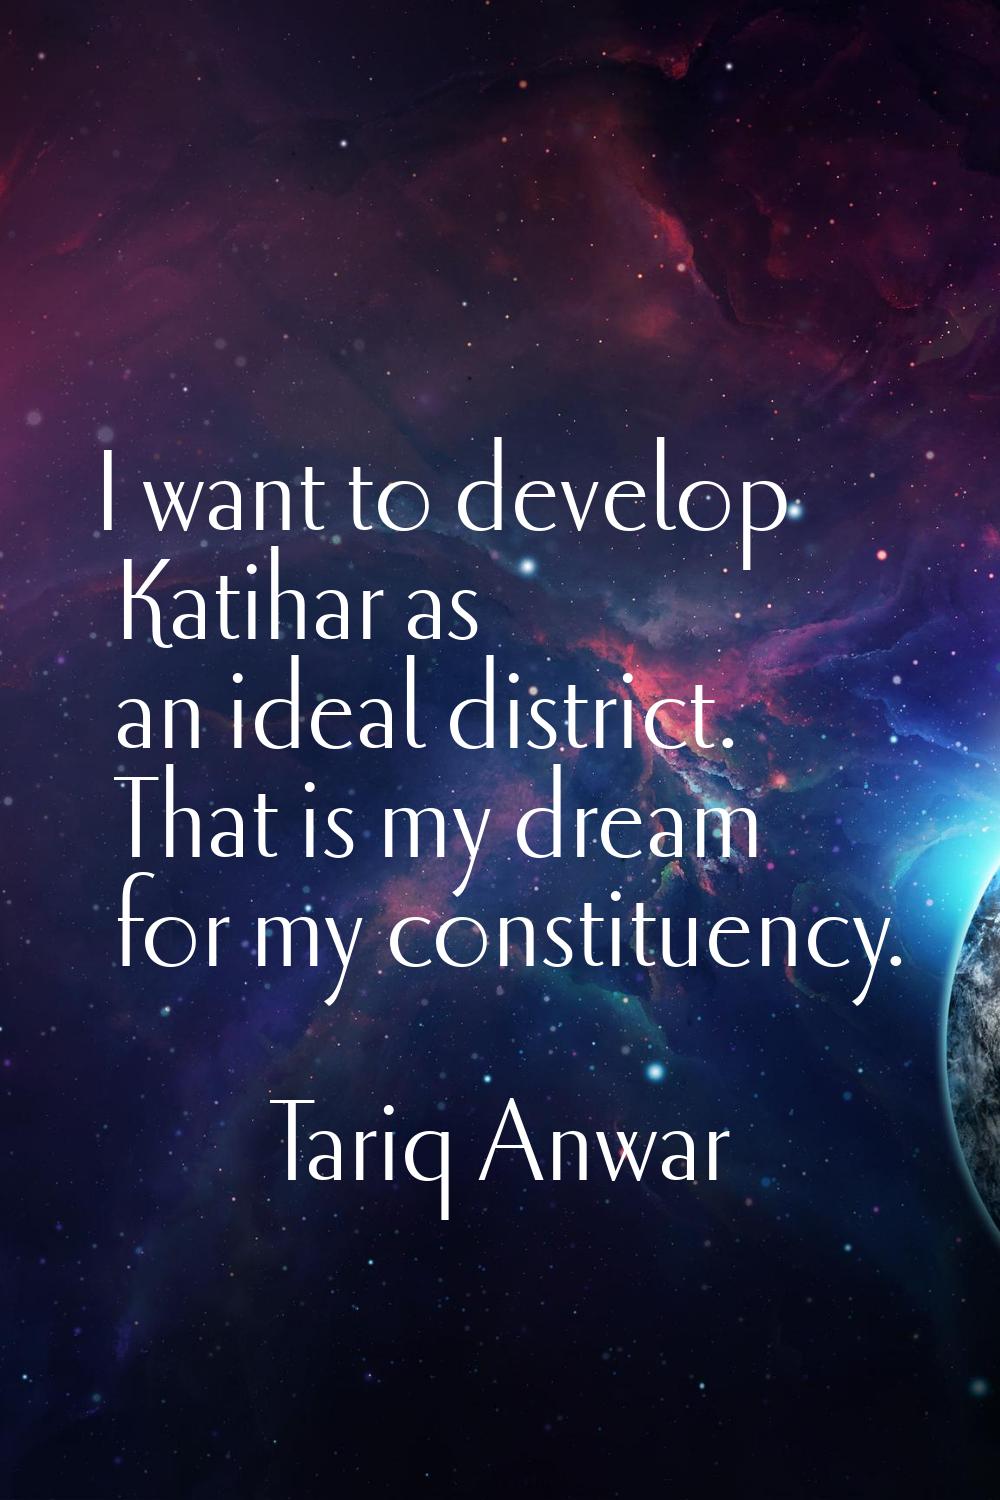 I want to develop Katihar as an ideal district. That is my dream for my constituency.